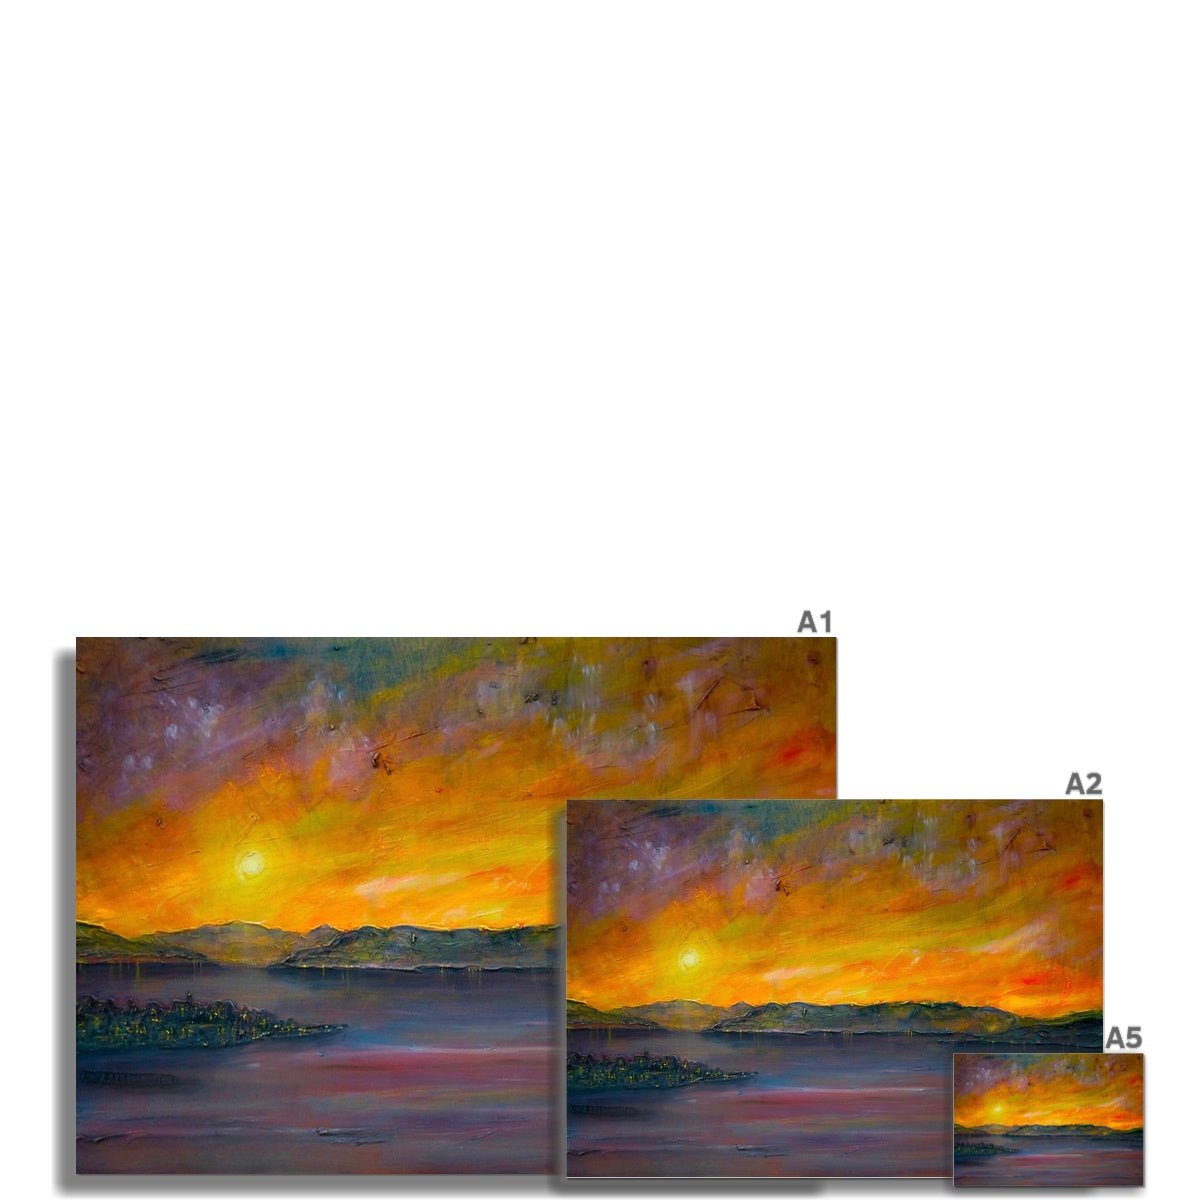 Sunset Over Gourock Painting | Fine Art Prints From Scotland-Unframed Prints-River Clyde Art Gallery-Paintings, Prints, Homeware, Art Gifts From Scotland By Scottish Artist Kevin Hunter